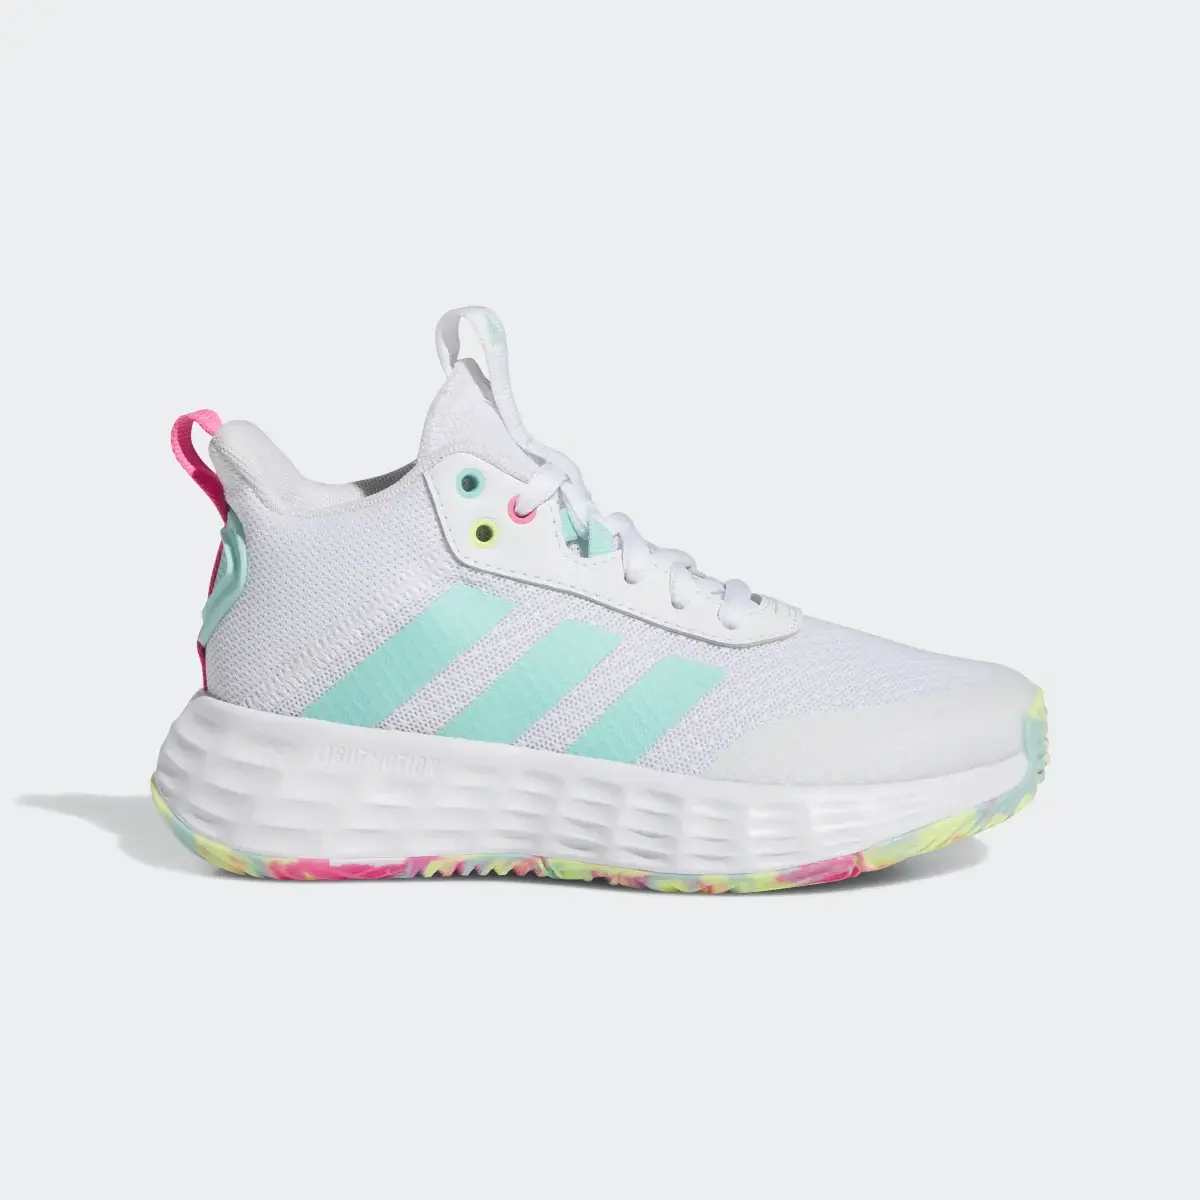 Adidas Ownthegame 2.0 Shoes. 2